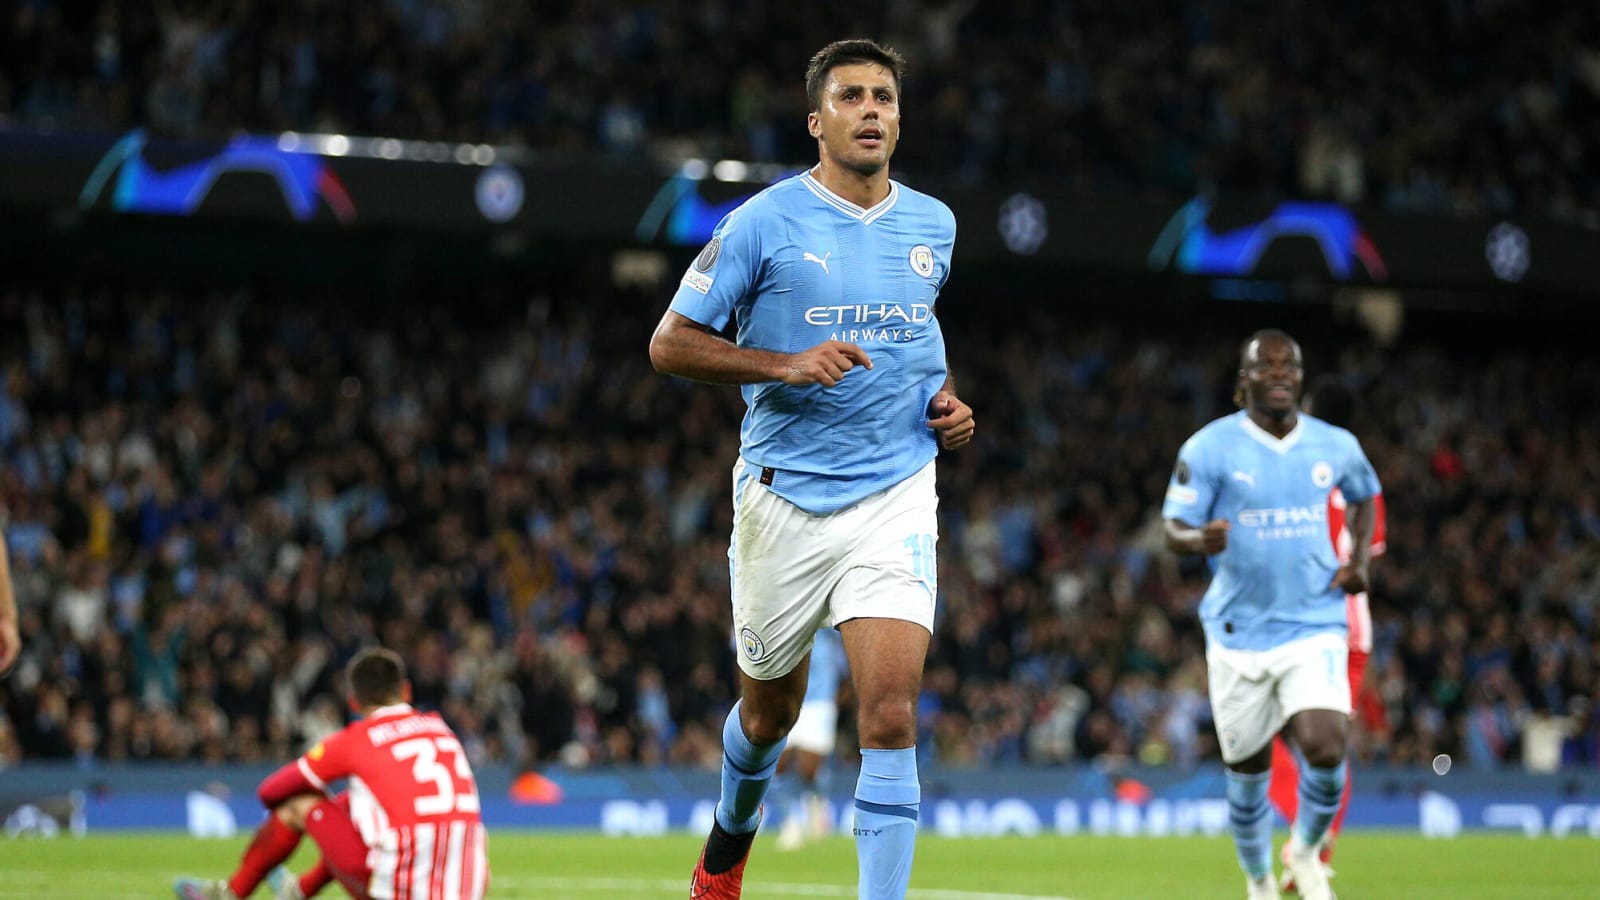 Watch: Rodri at it again in the Champions League scoring another stunner